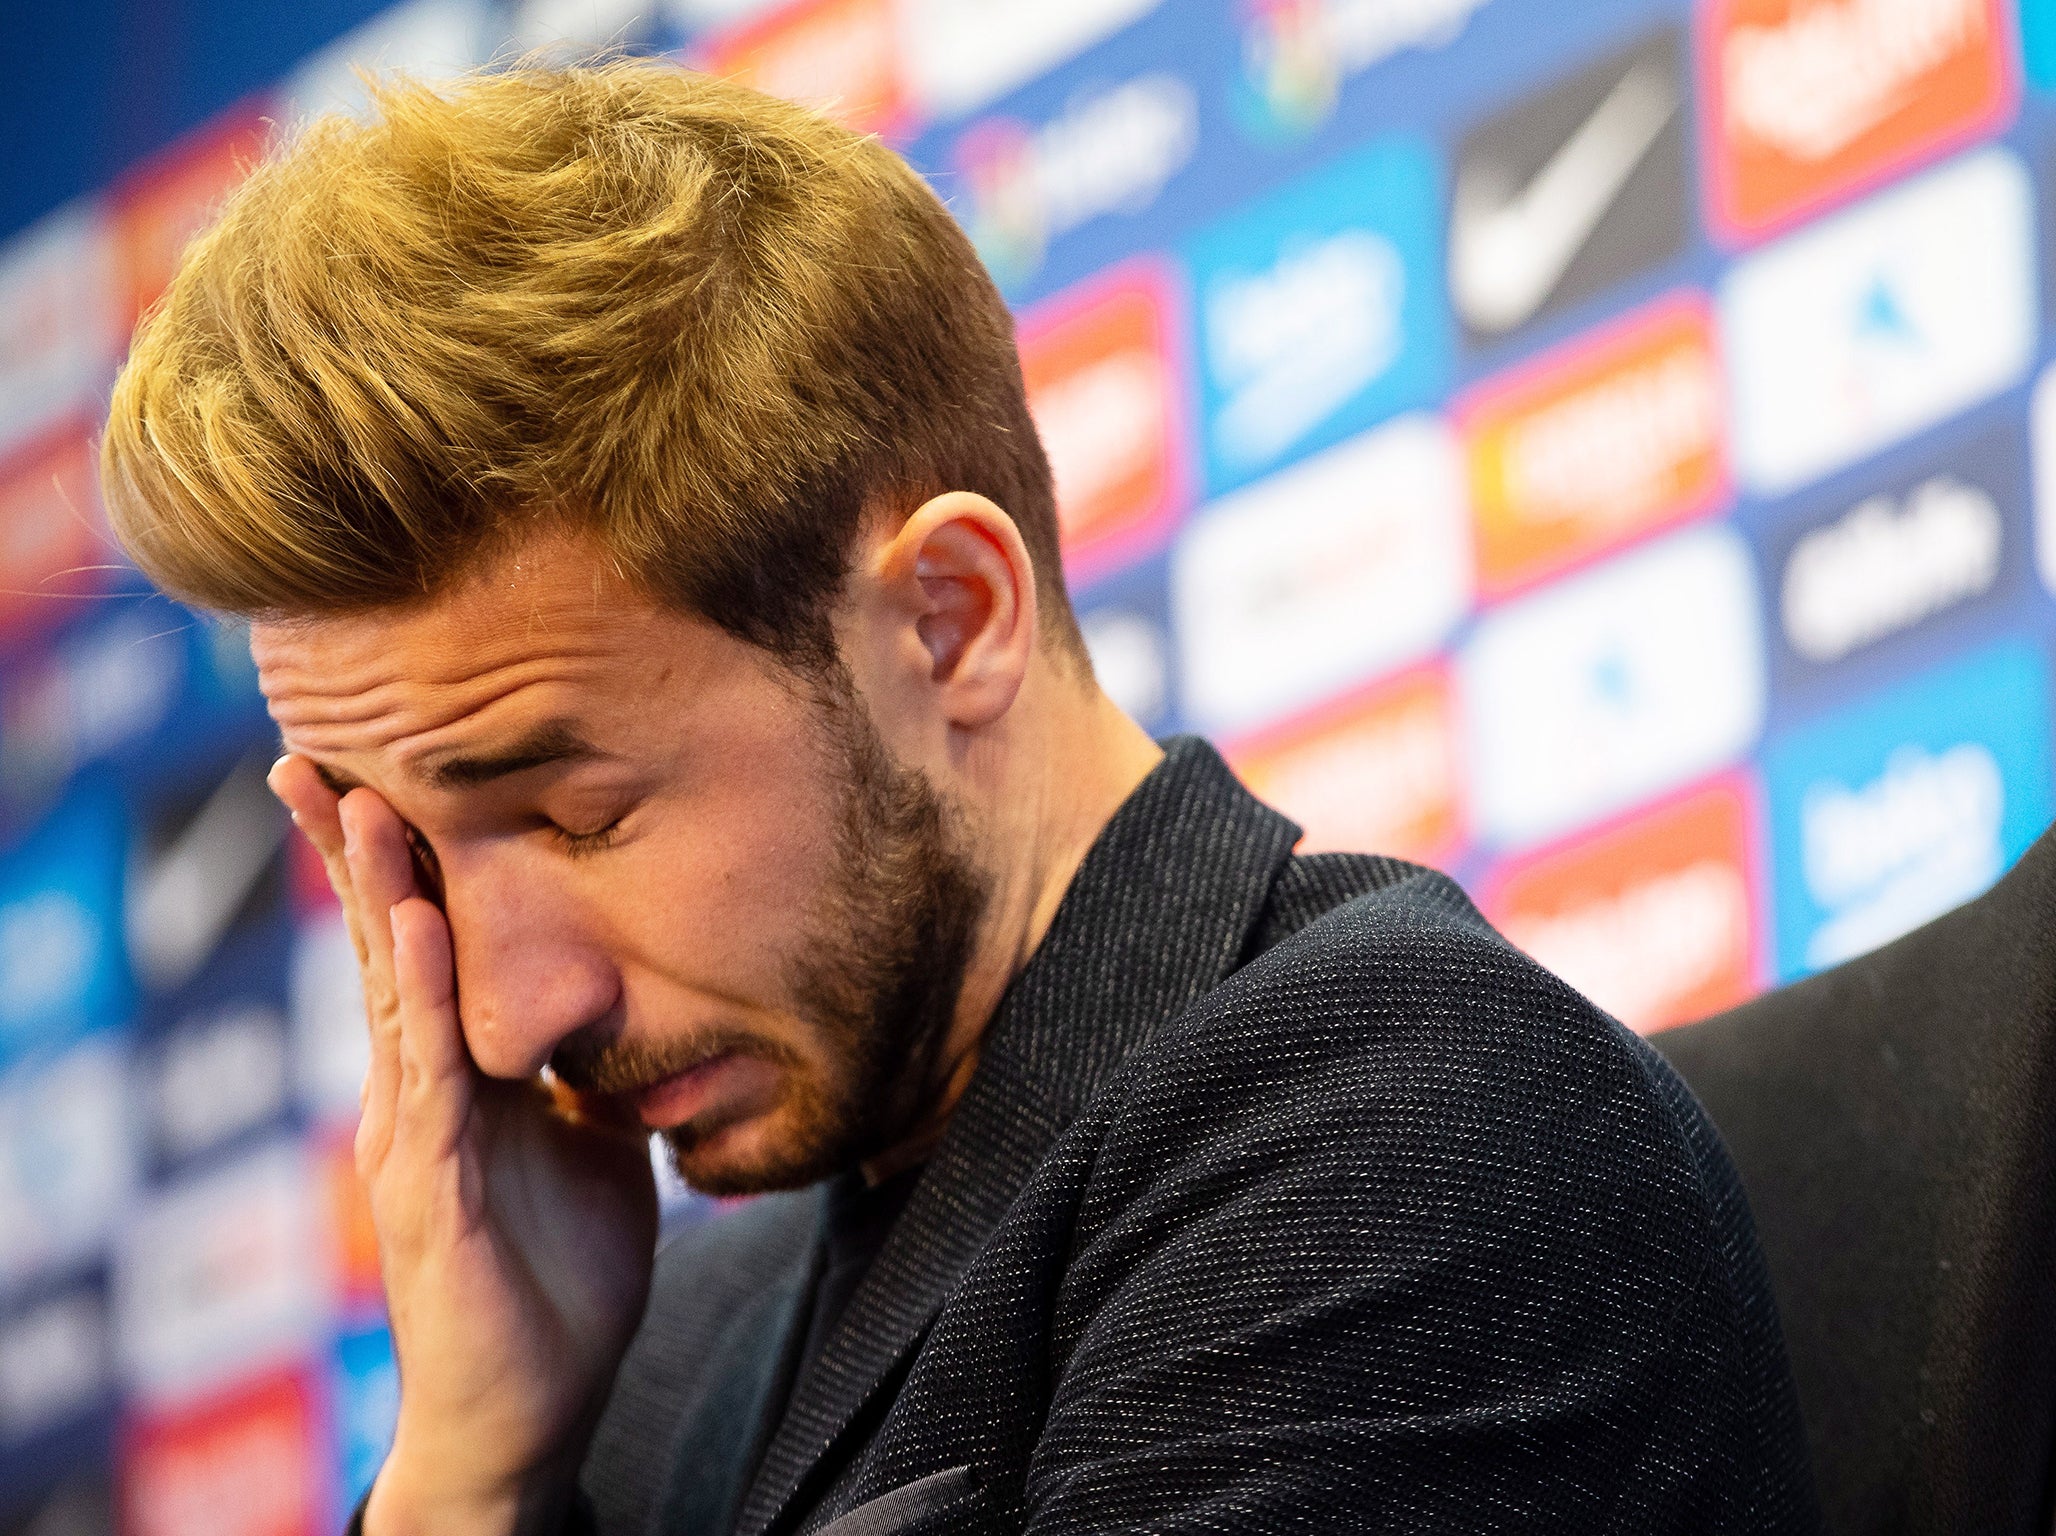 Sergi Samper, 24, has agreed to terminate his Barcelona contract